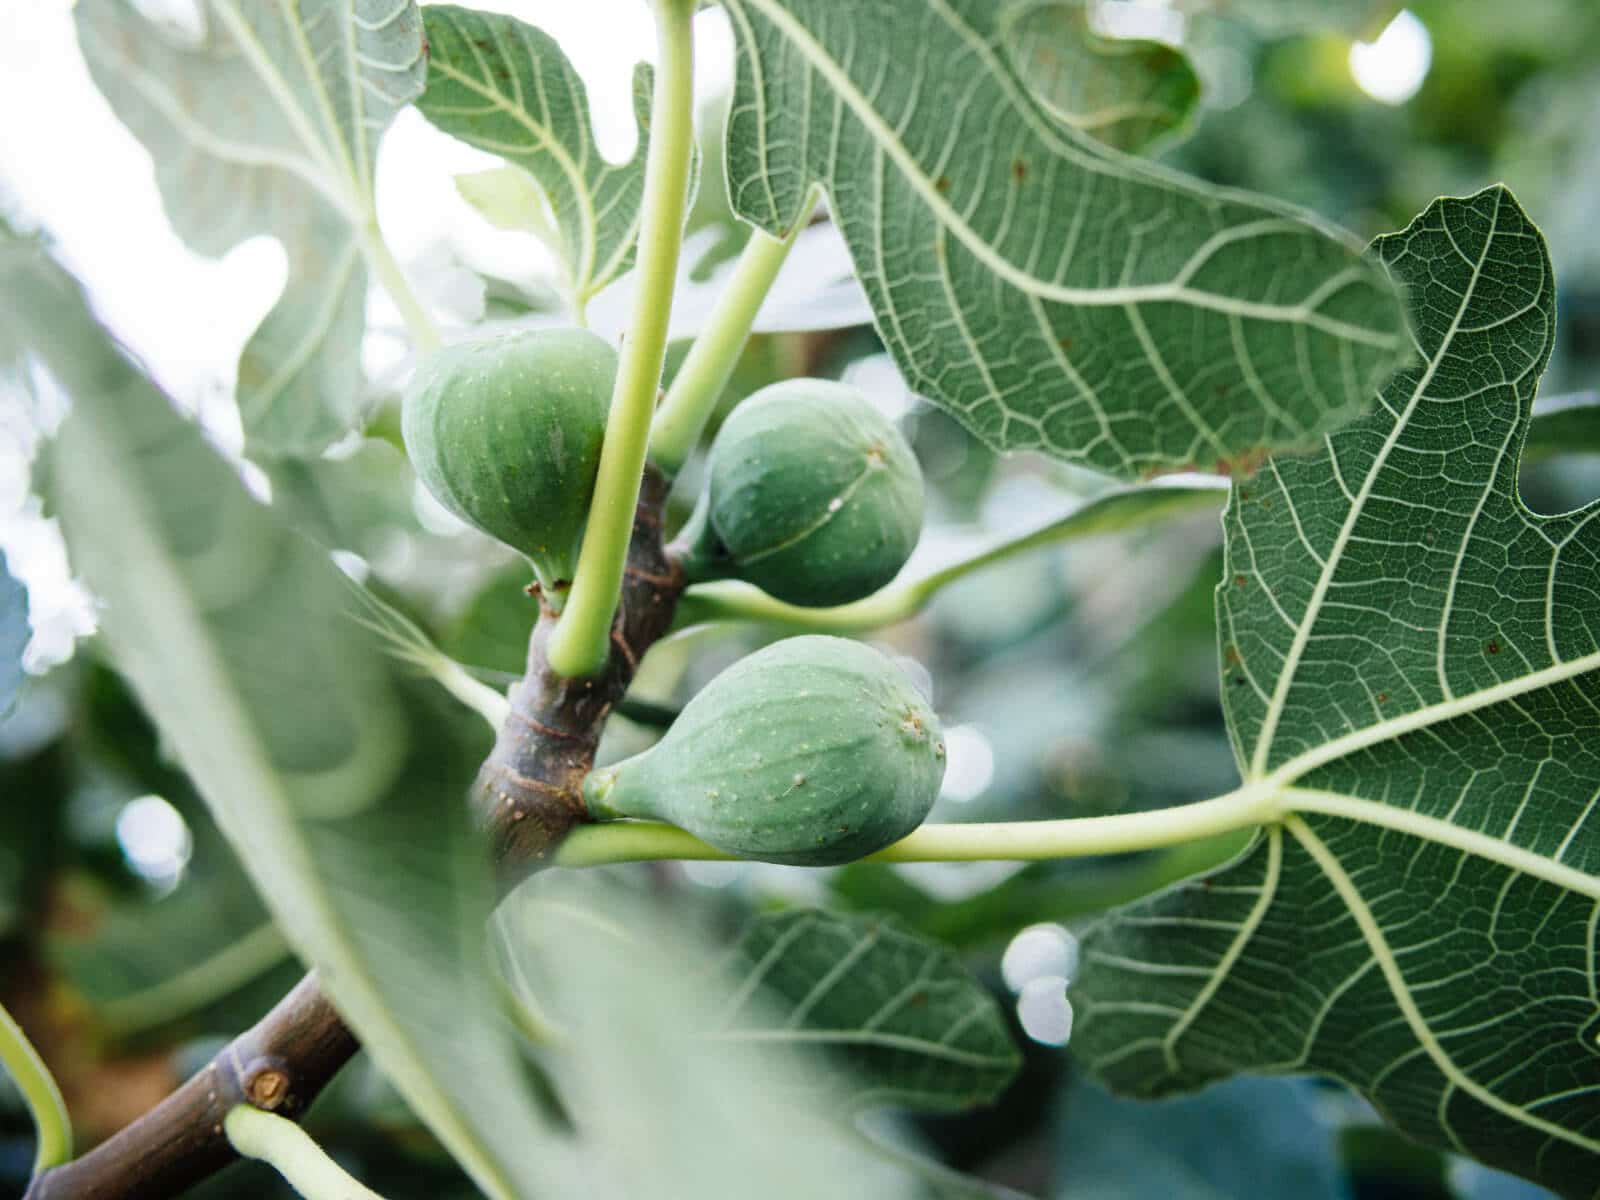 Harvest your fruits frequently to keep fig beetles off them